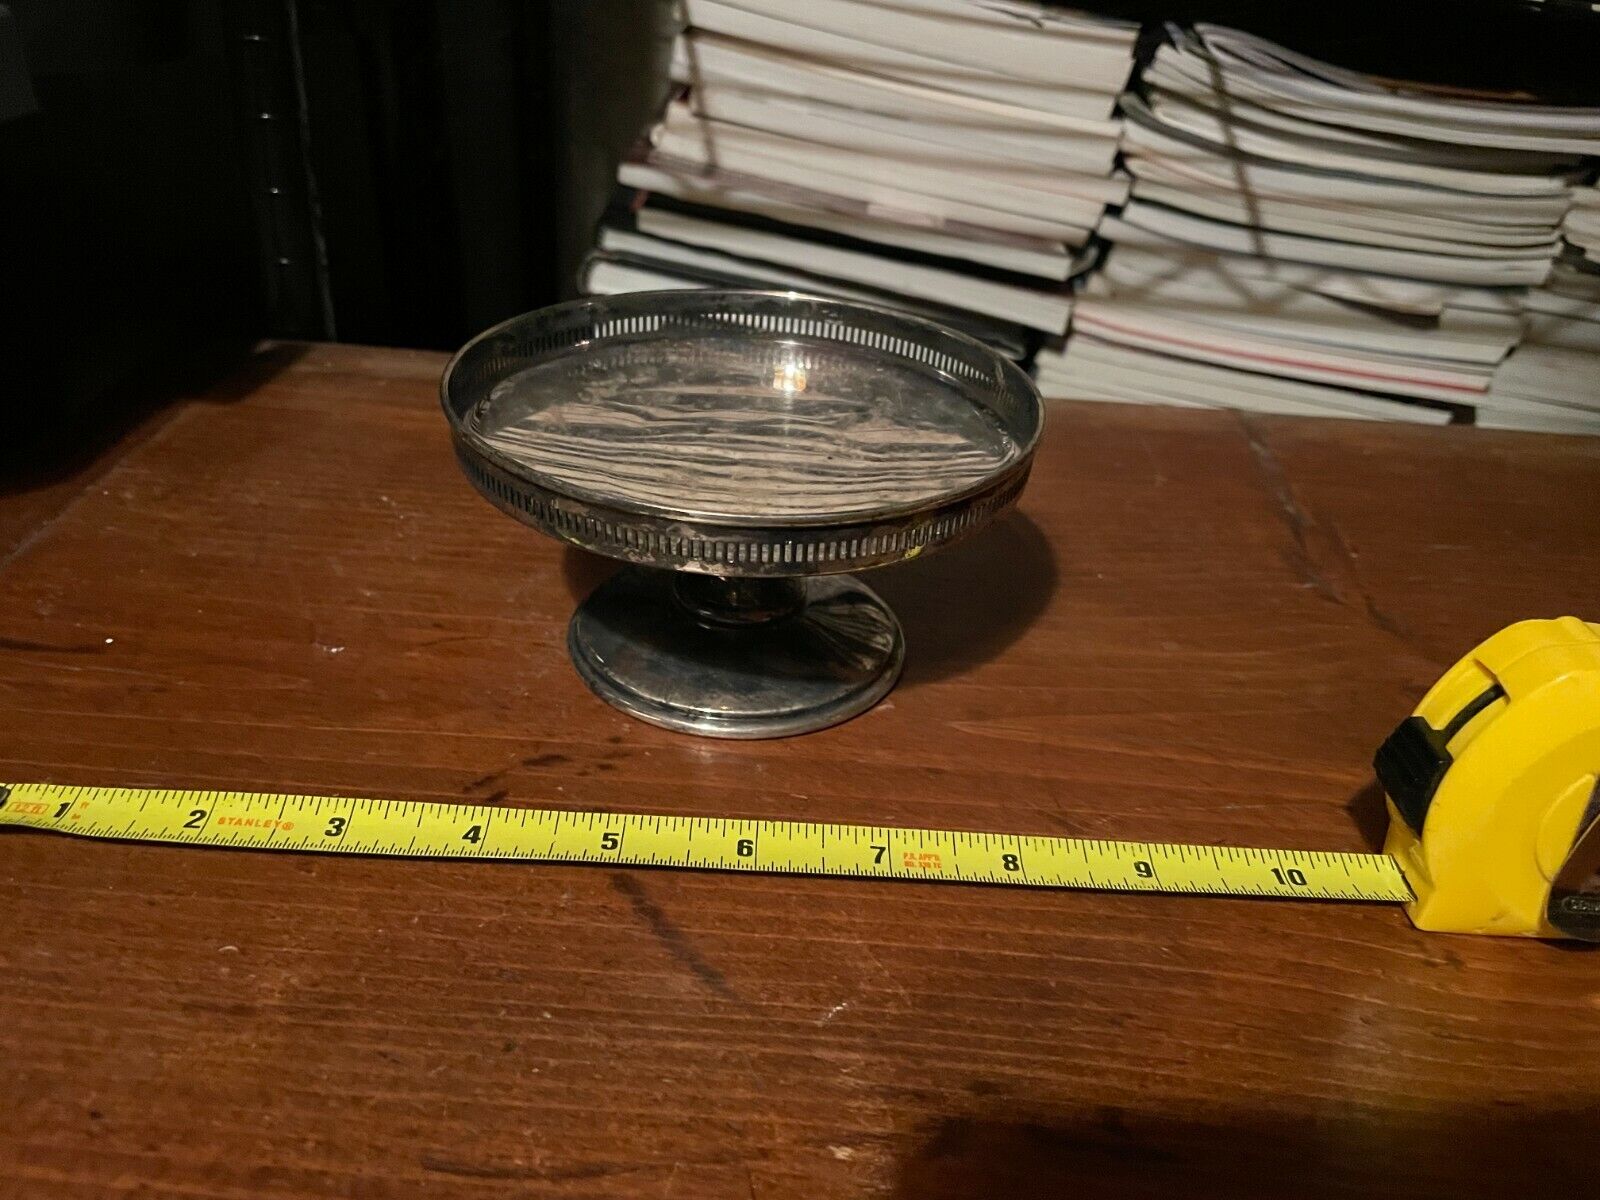 19th or 20th Century Silver Plate Stand - American